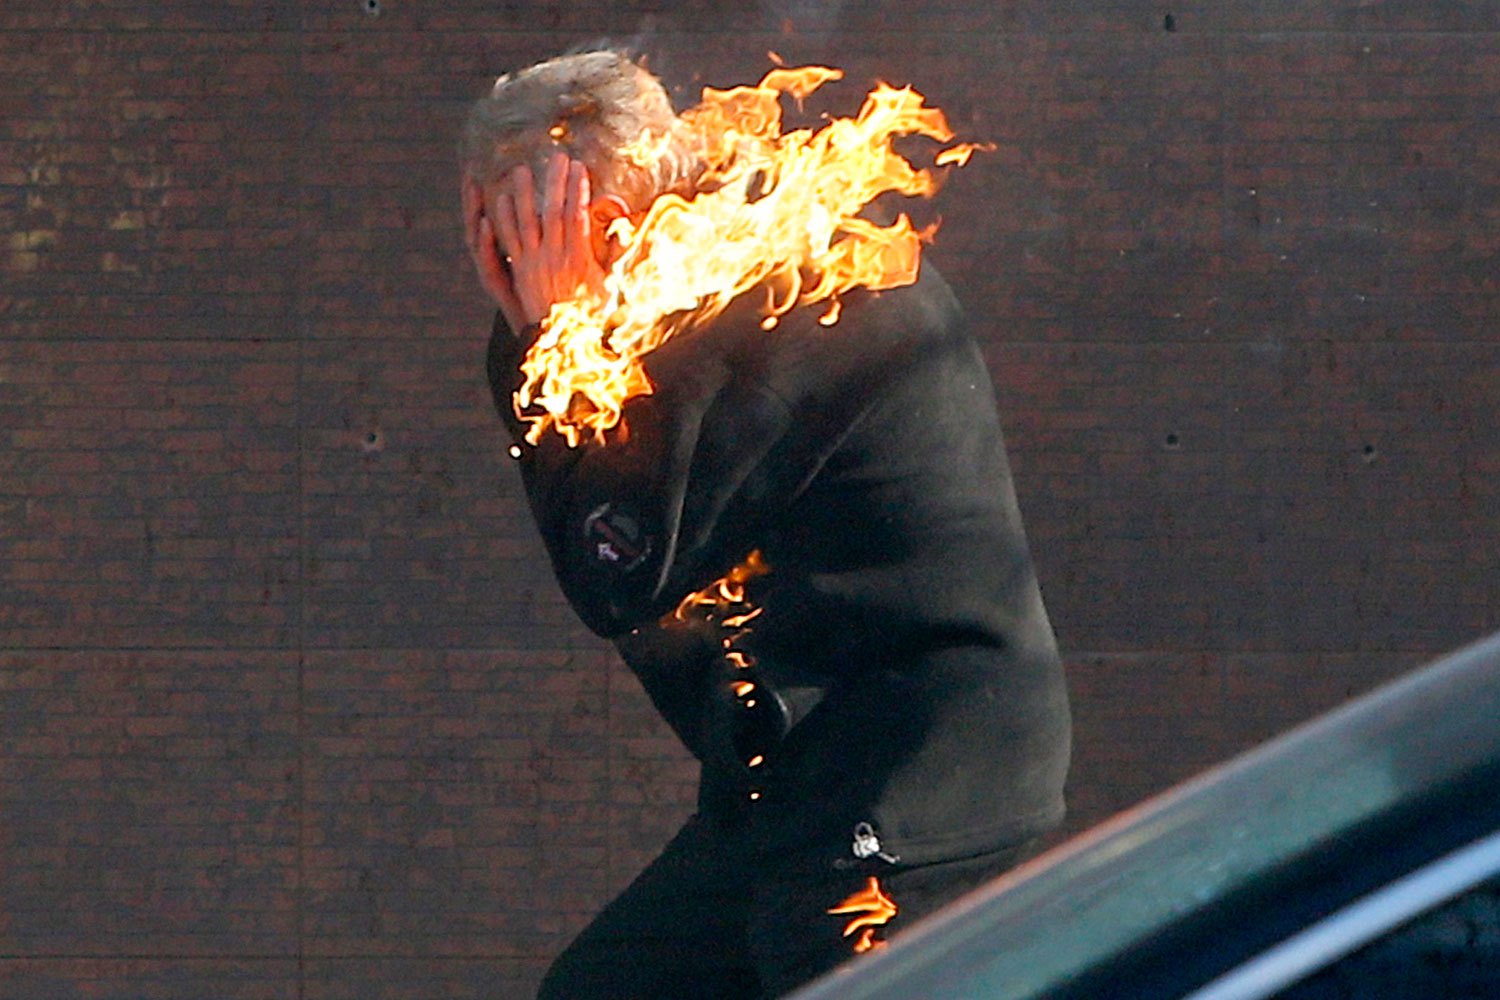 An anti-government protester is engulfed in flames while running from the scene during clashes with riot police outside Ukraine's parliament in Kiev, on Feb. 18, 2014.